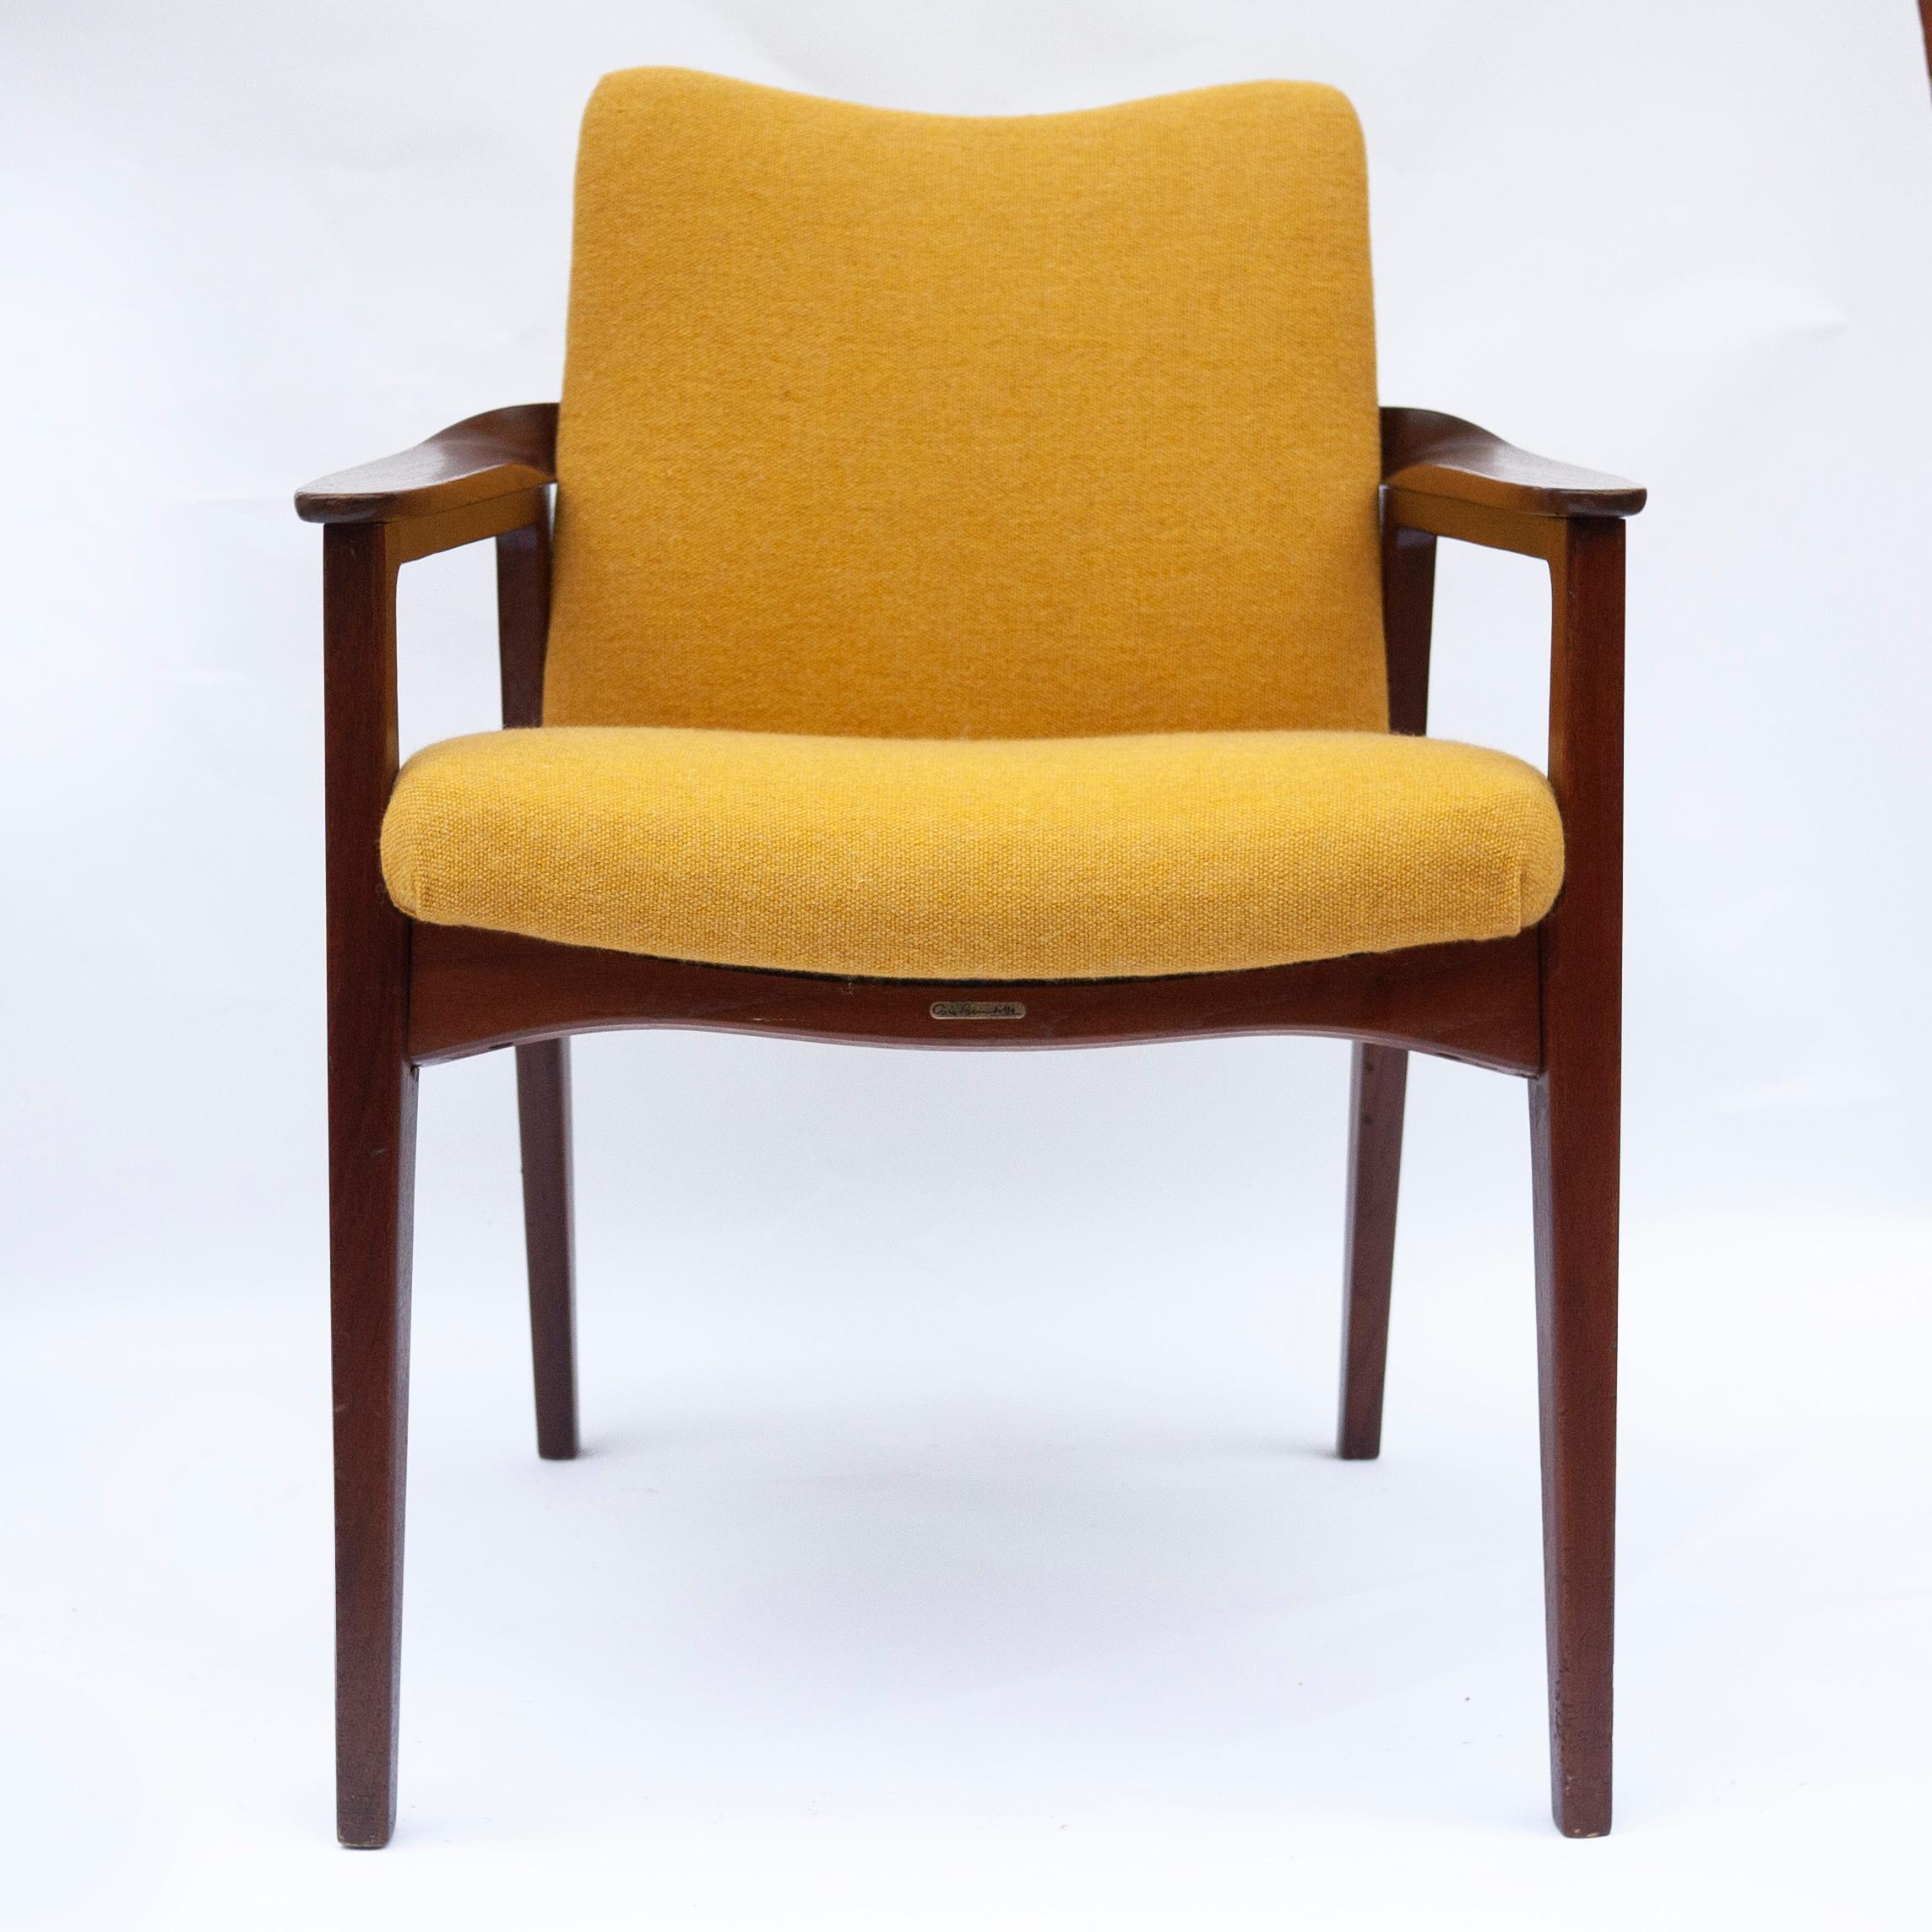 Mid-Century Modern Mid-Century Teak Armchair with Yellow Upholstery by Sigvard Bernadotte